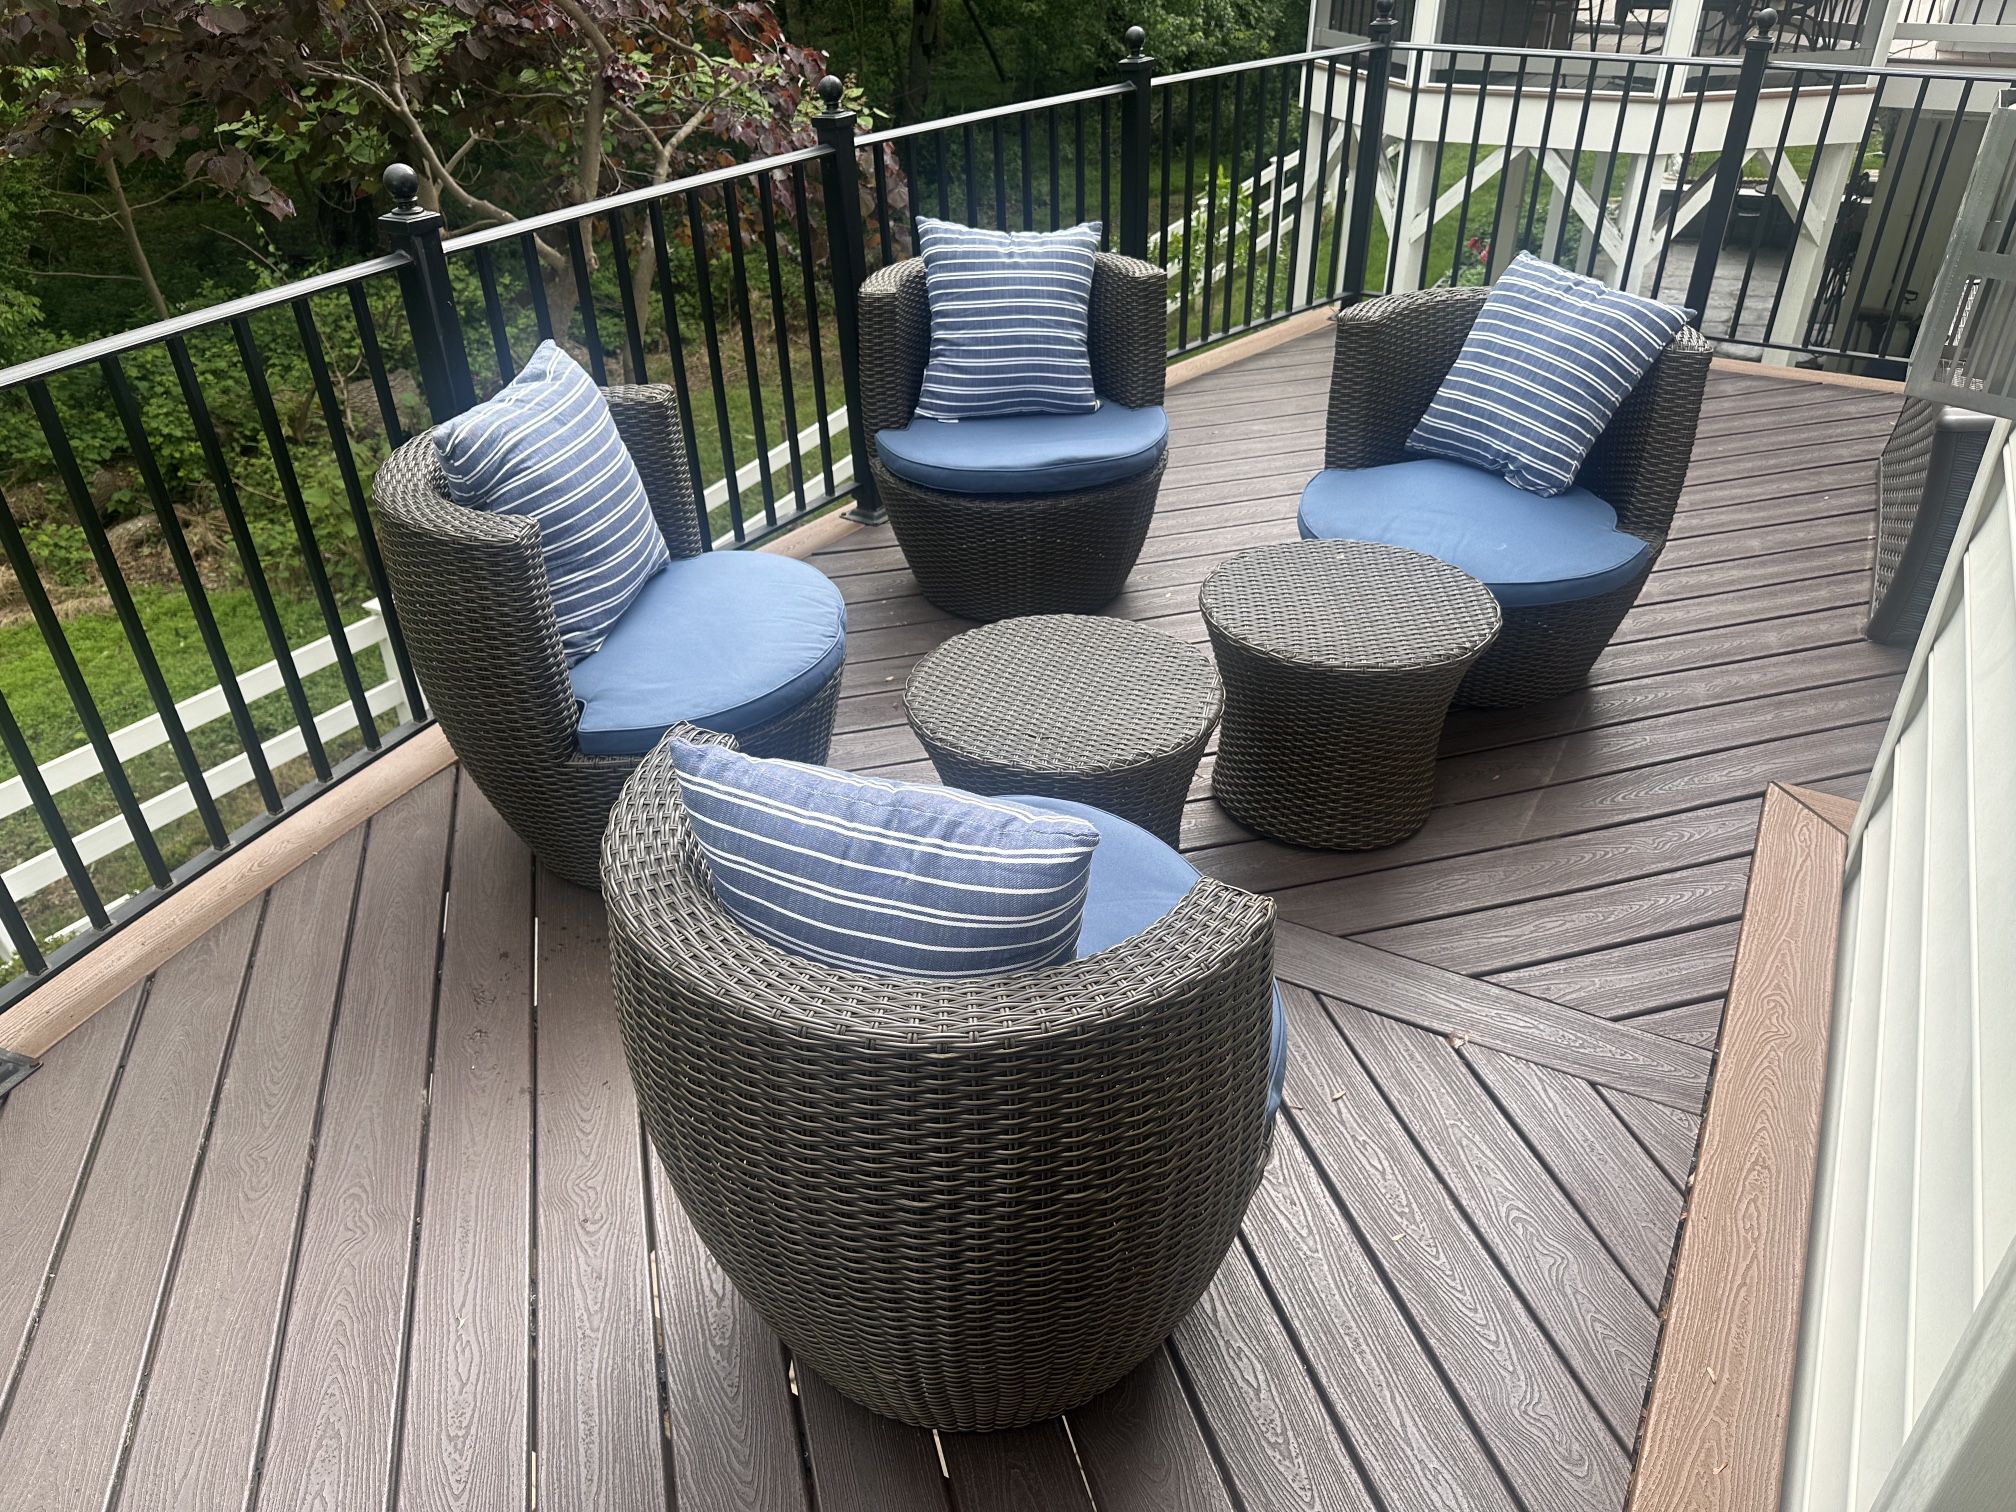 4 Outdoor Chairs With Two Small Tables 